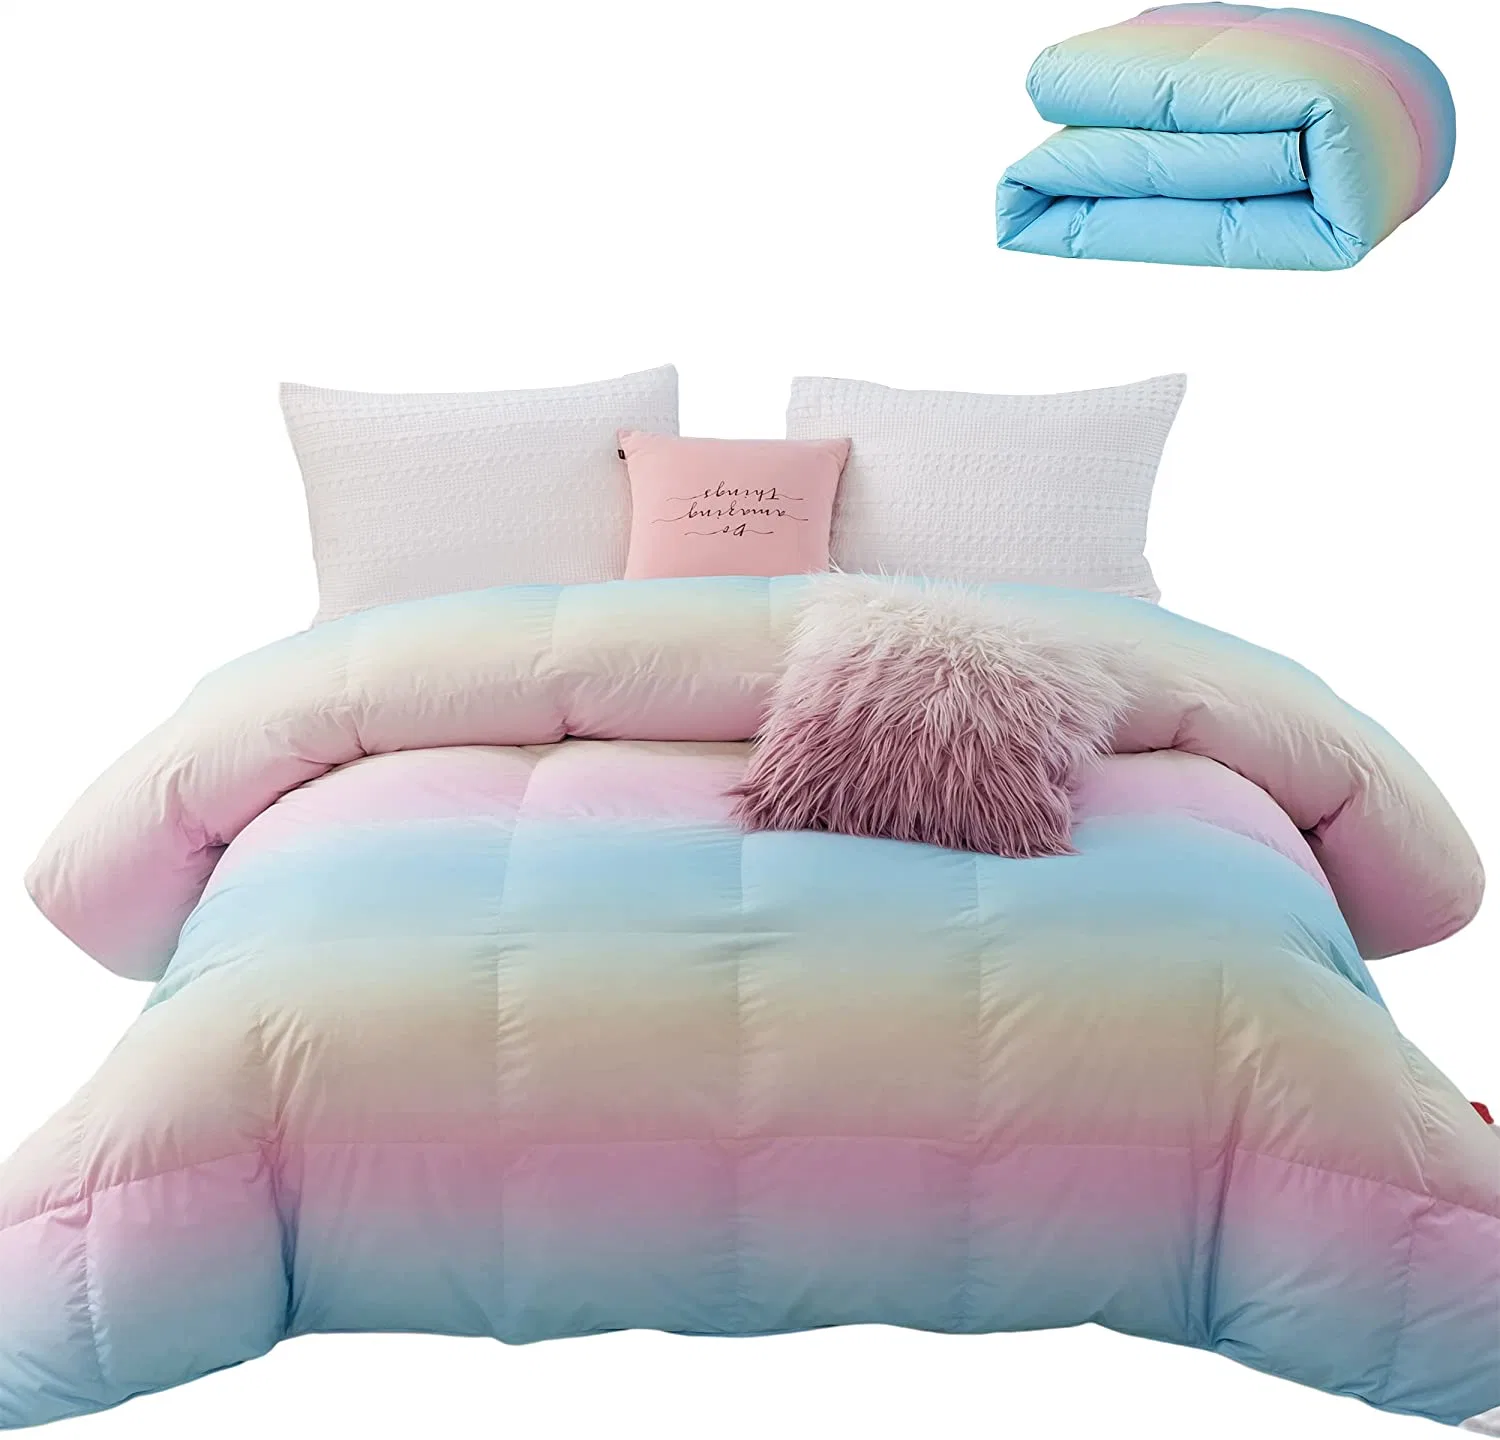 Heavyweight 75% Down Comforter Twin Size, Fluffy Duvet Insert with 8 Corner Tabs, Durable Down Proof Cotton Blended Fabric (Rainbow 68"X90")